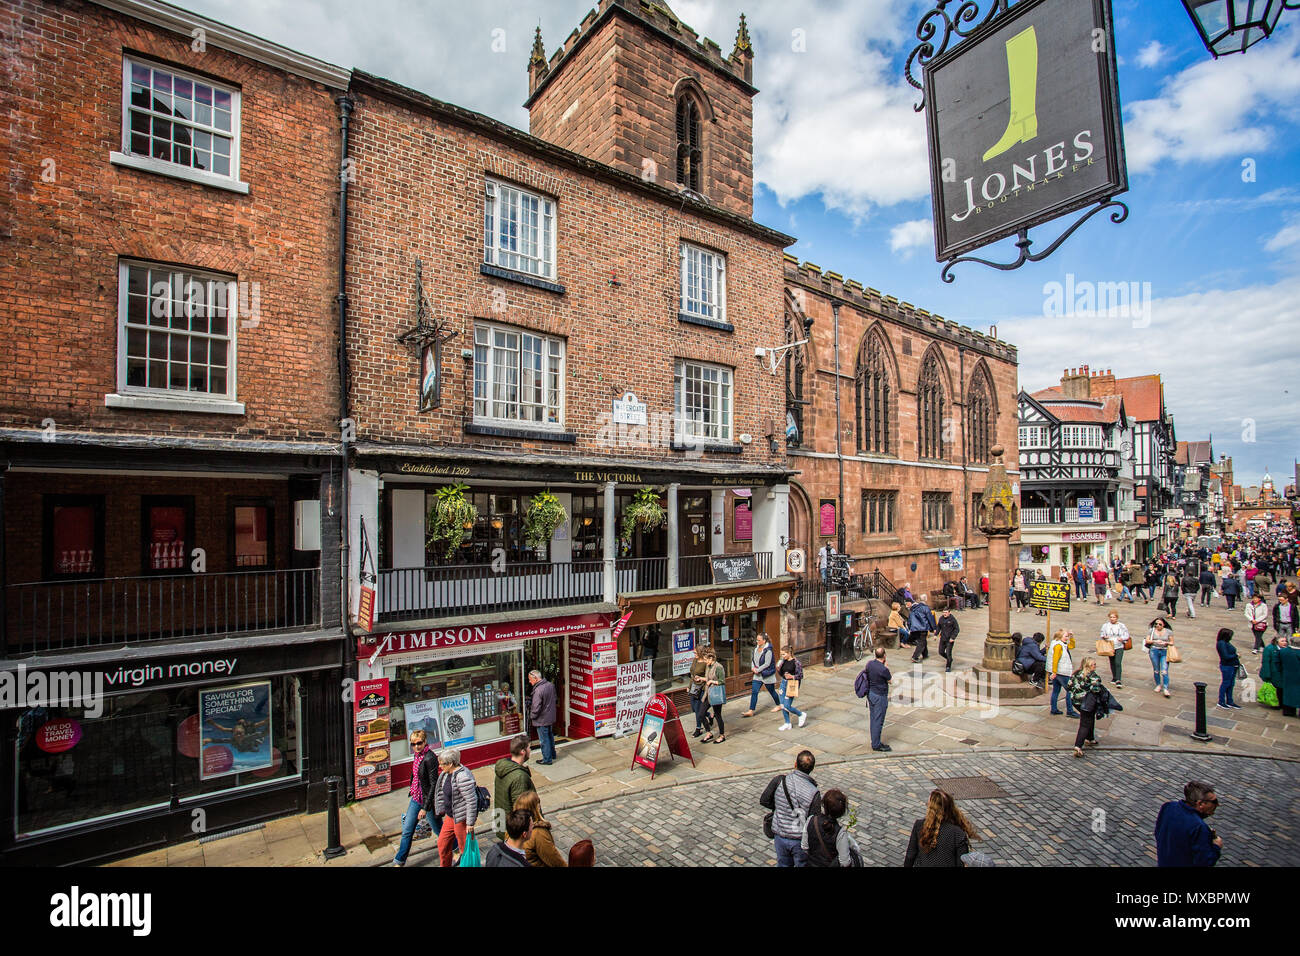 The Chester Cross in Eastgate Street in Chester, Cheshire, UK taken on 13 May 2017 Stock Photo